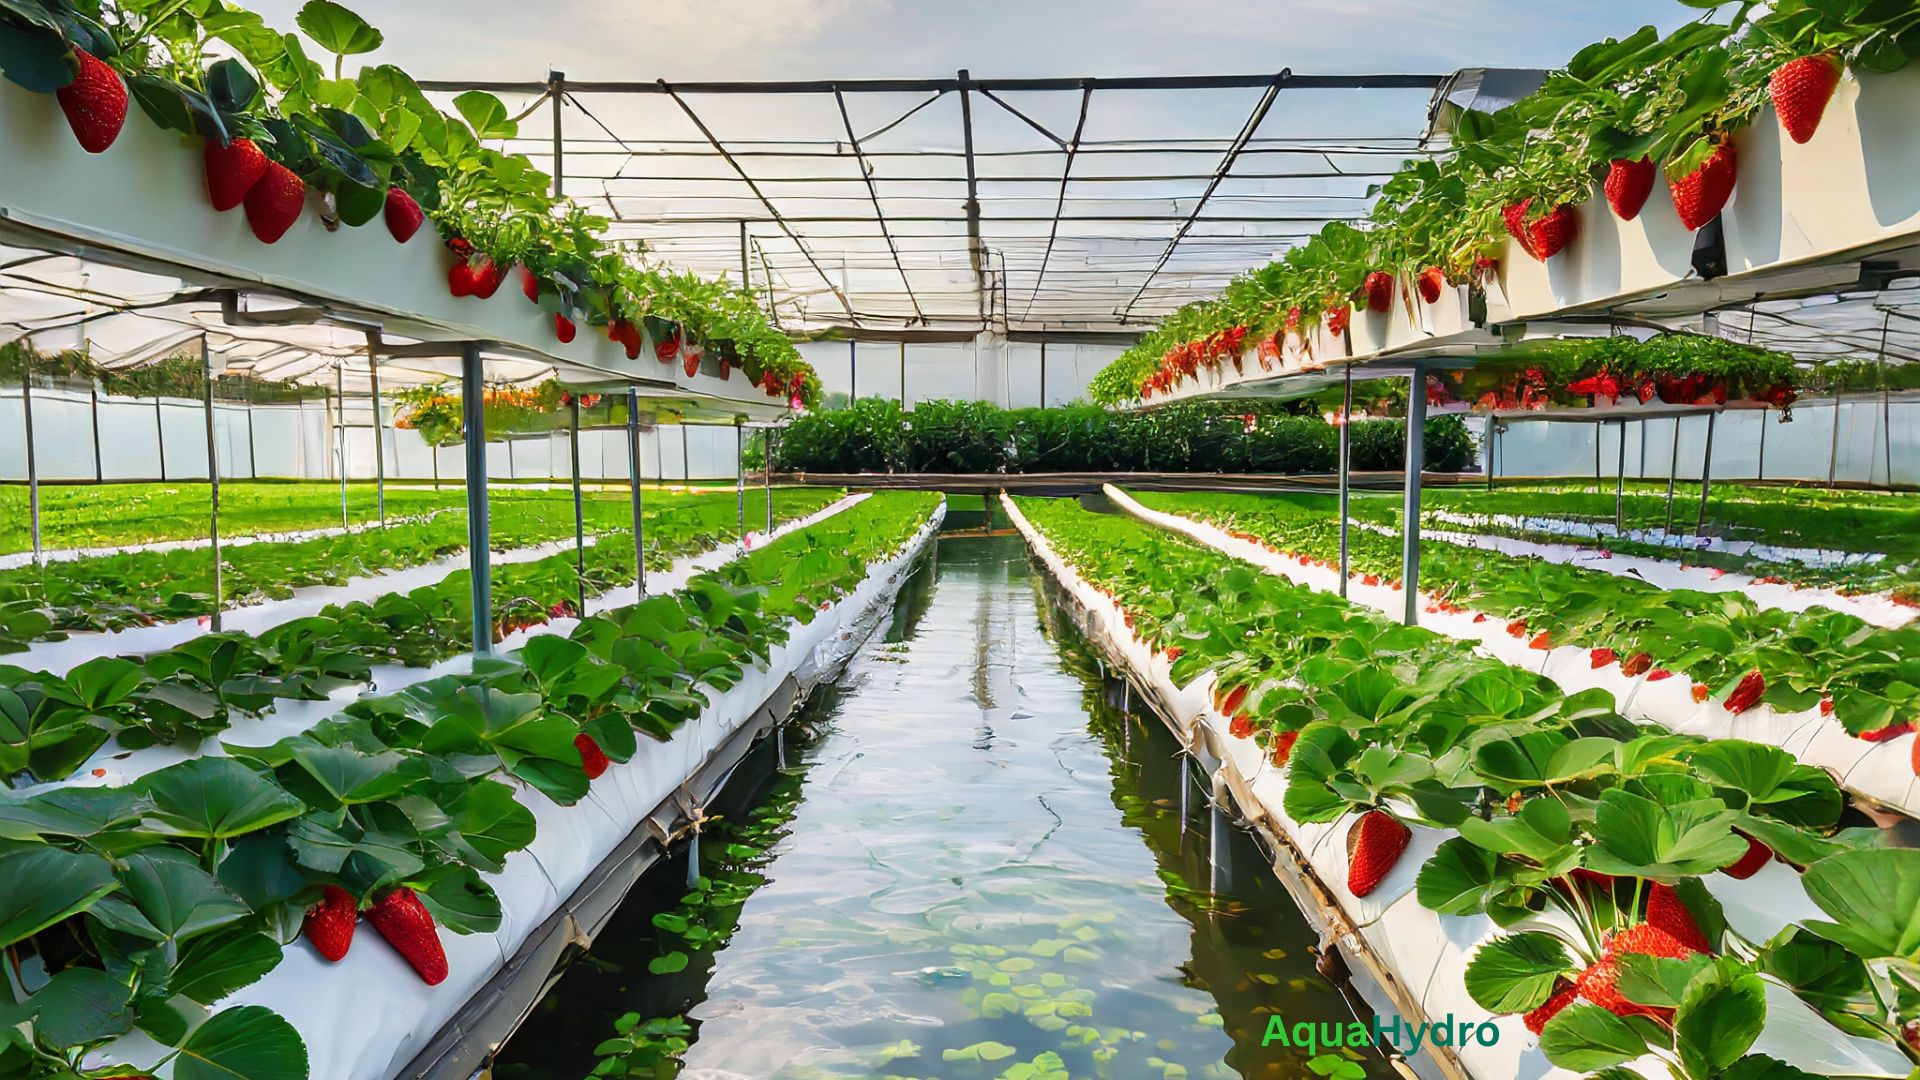 Strawberry Aquaponics: A thriving farm with vibrant red strawberries and healthy fish tanks in a sustainable ecosystem.